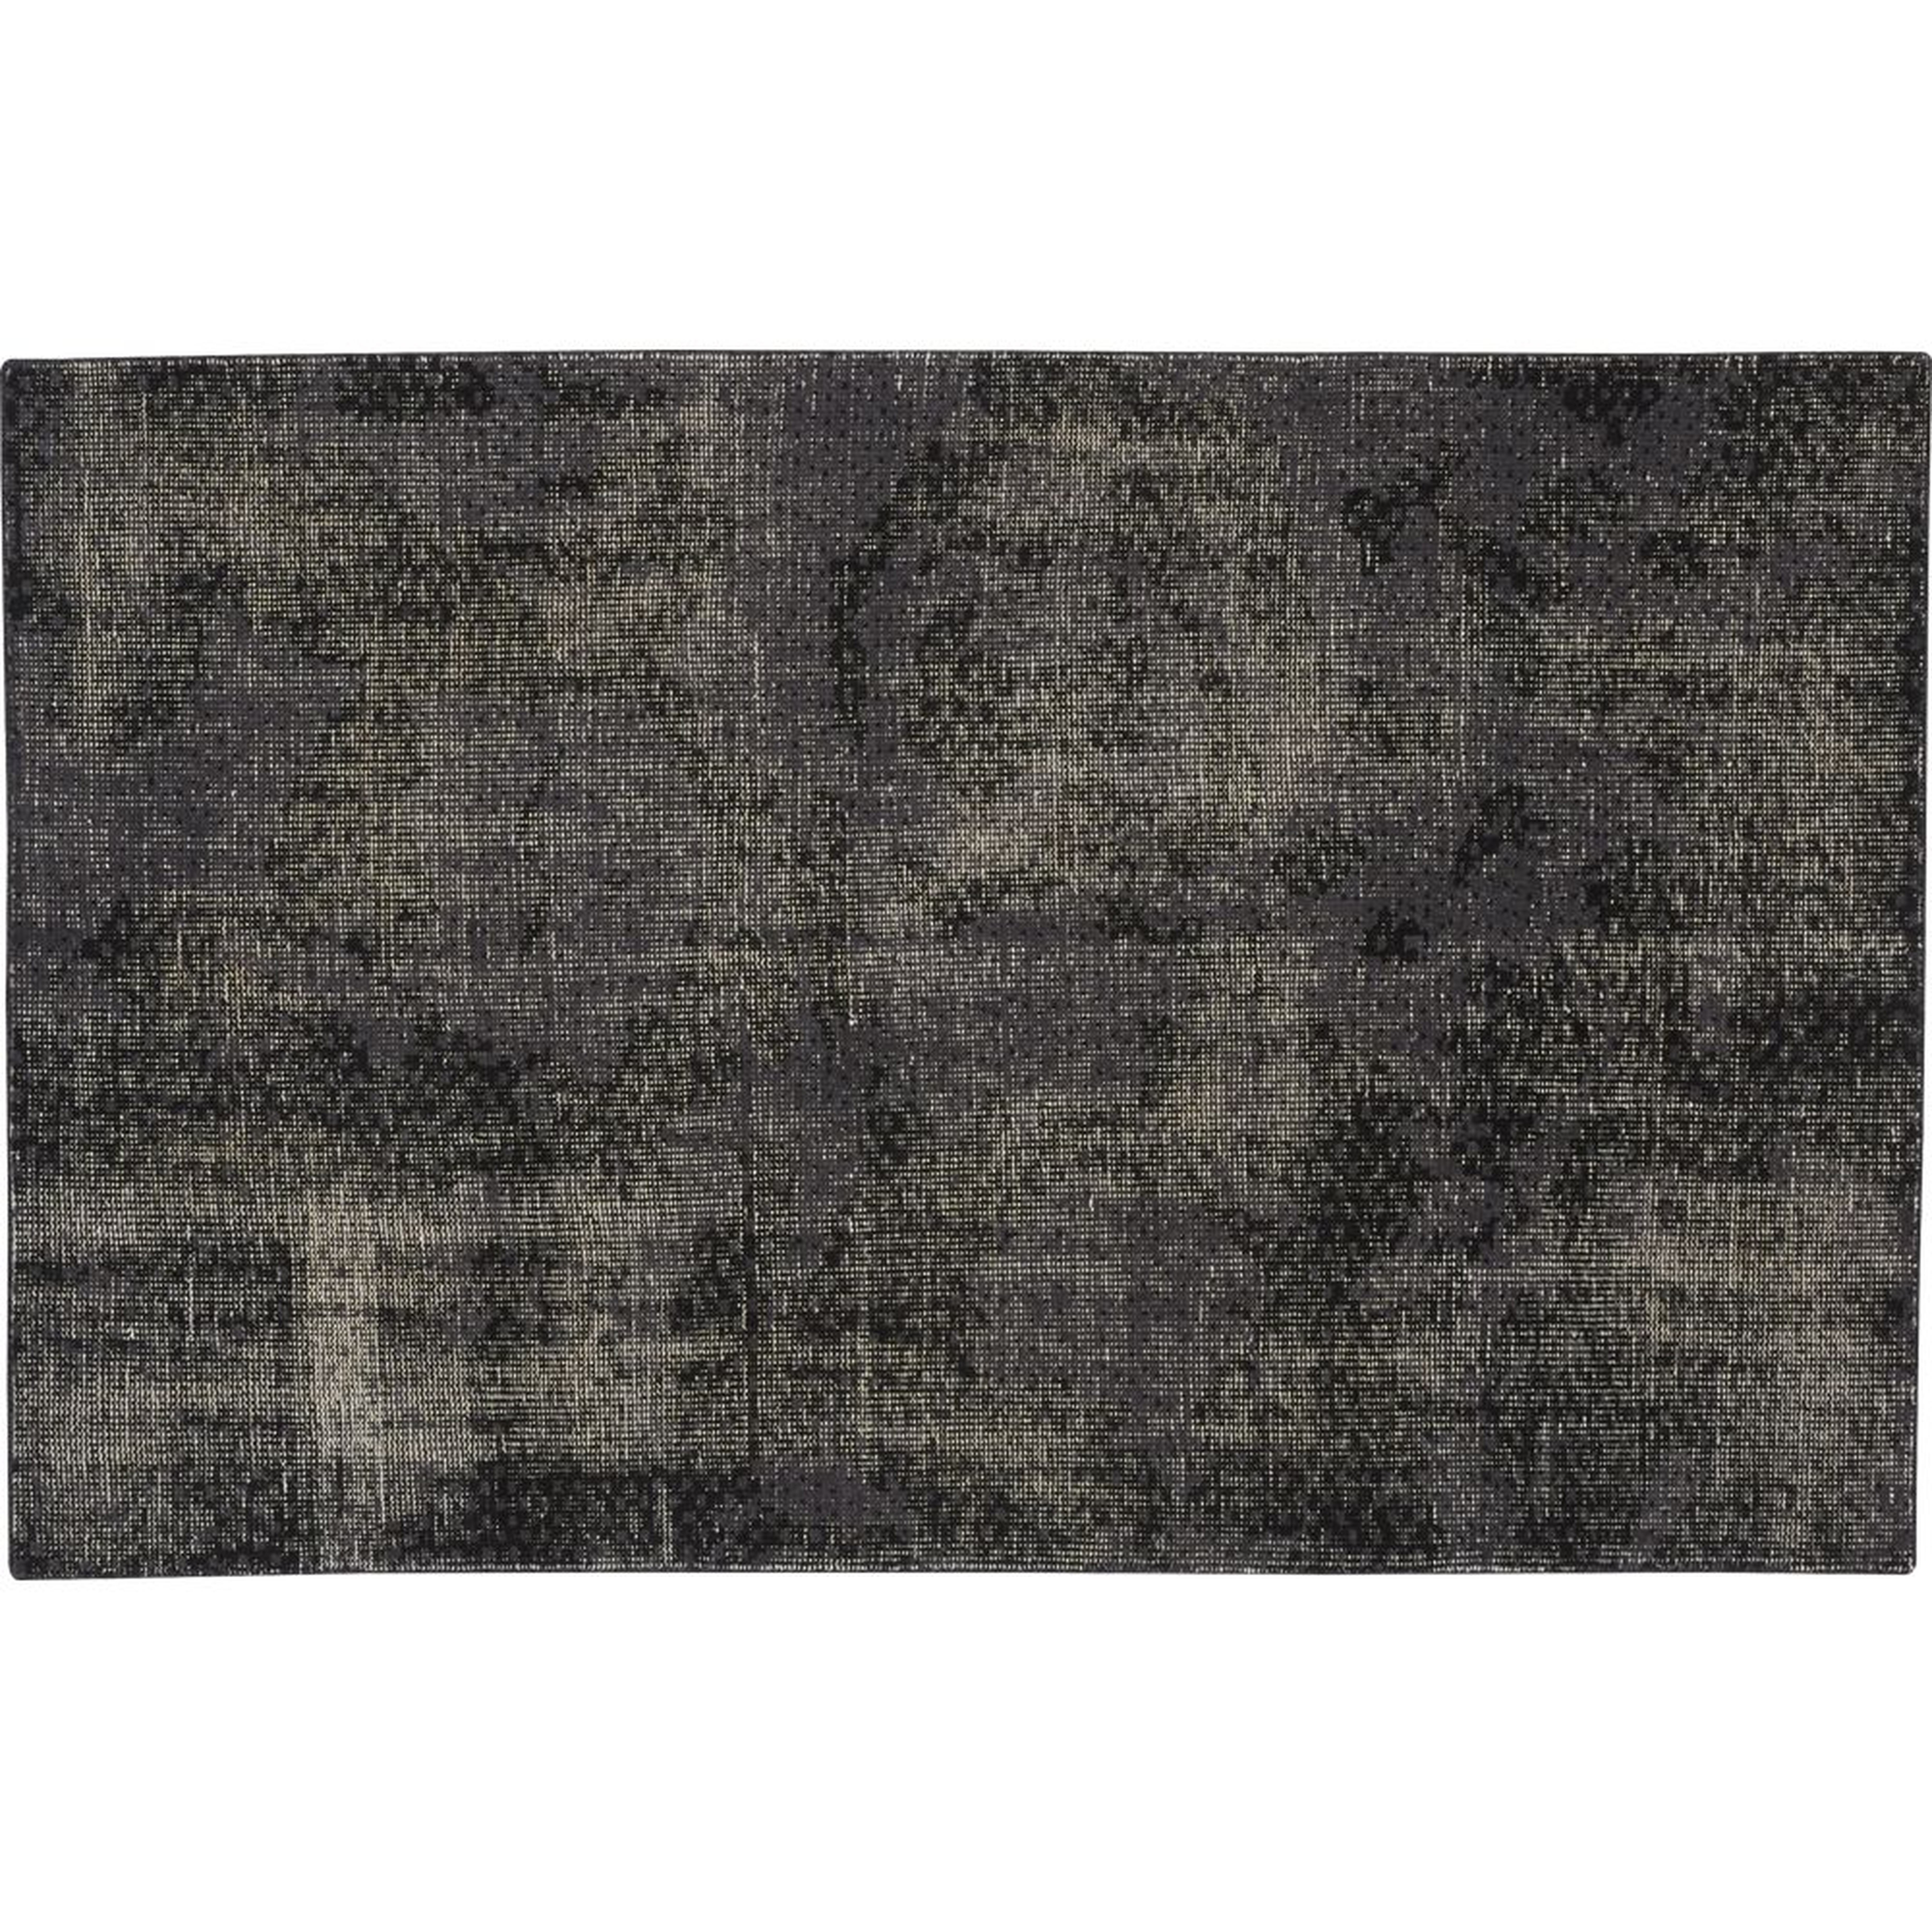 the hill-side disintegrated floral grey rug 5'x8' - CB2